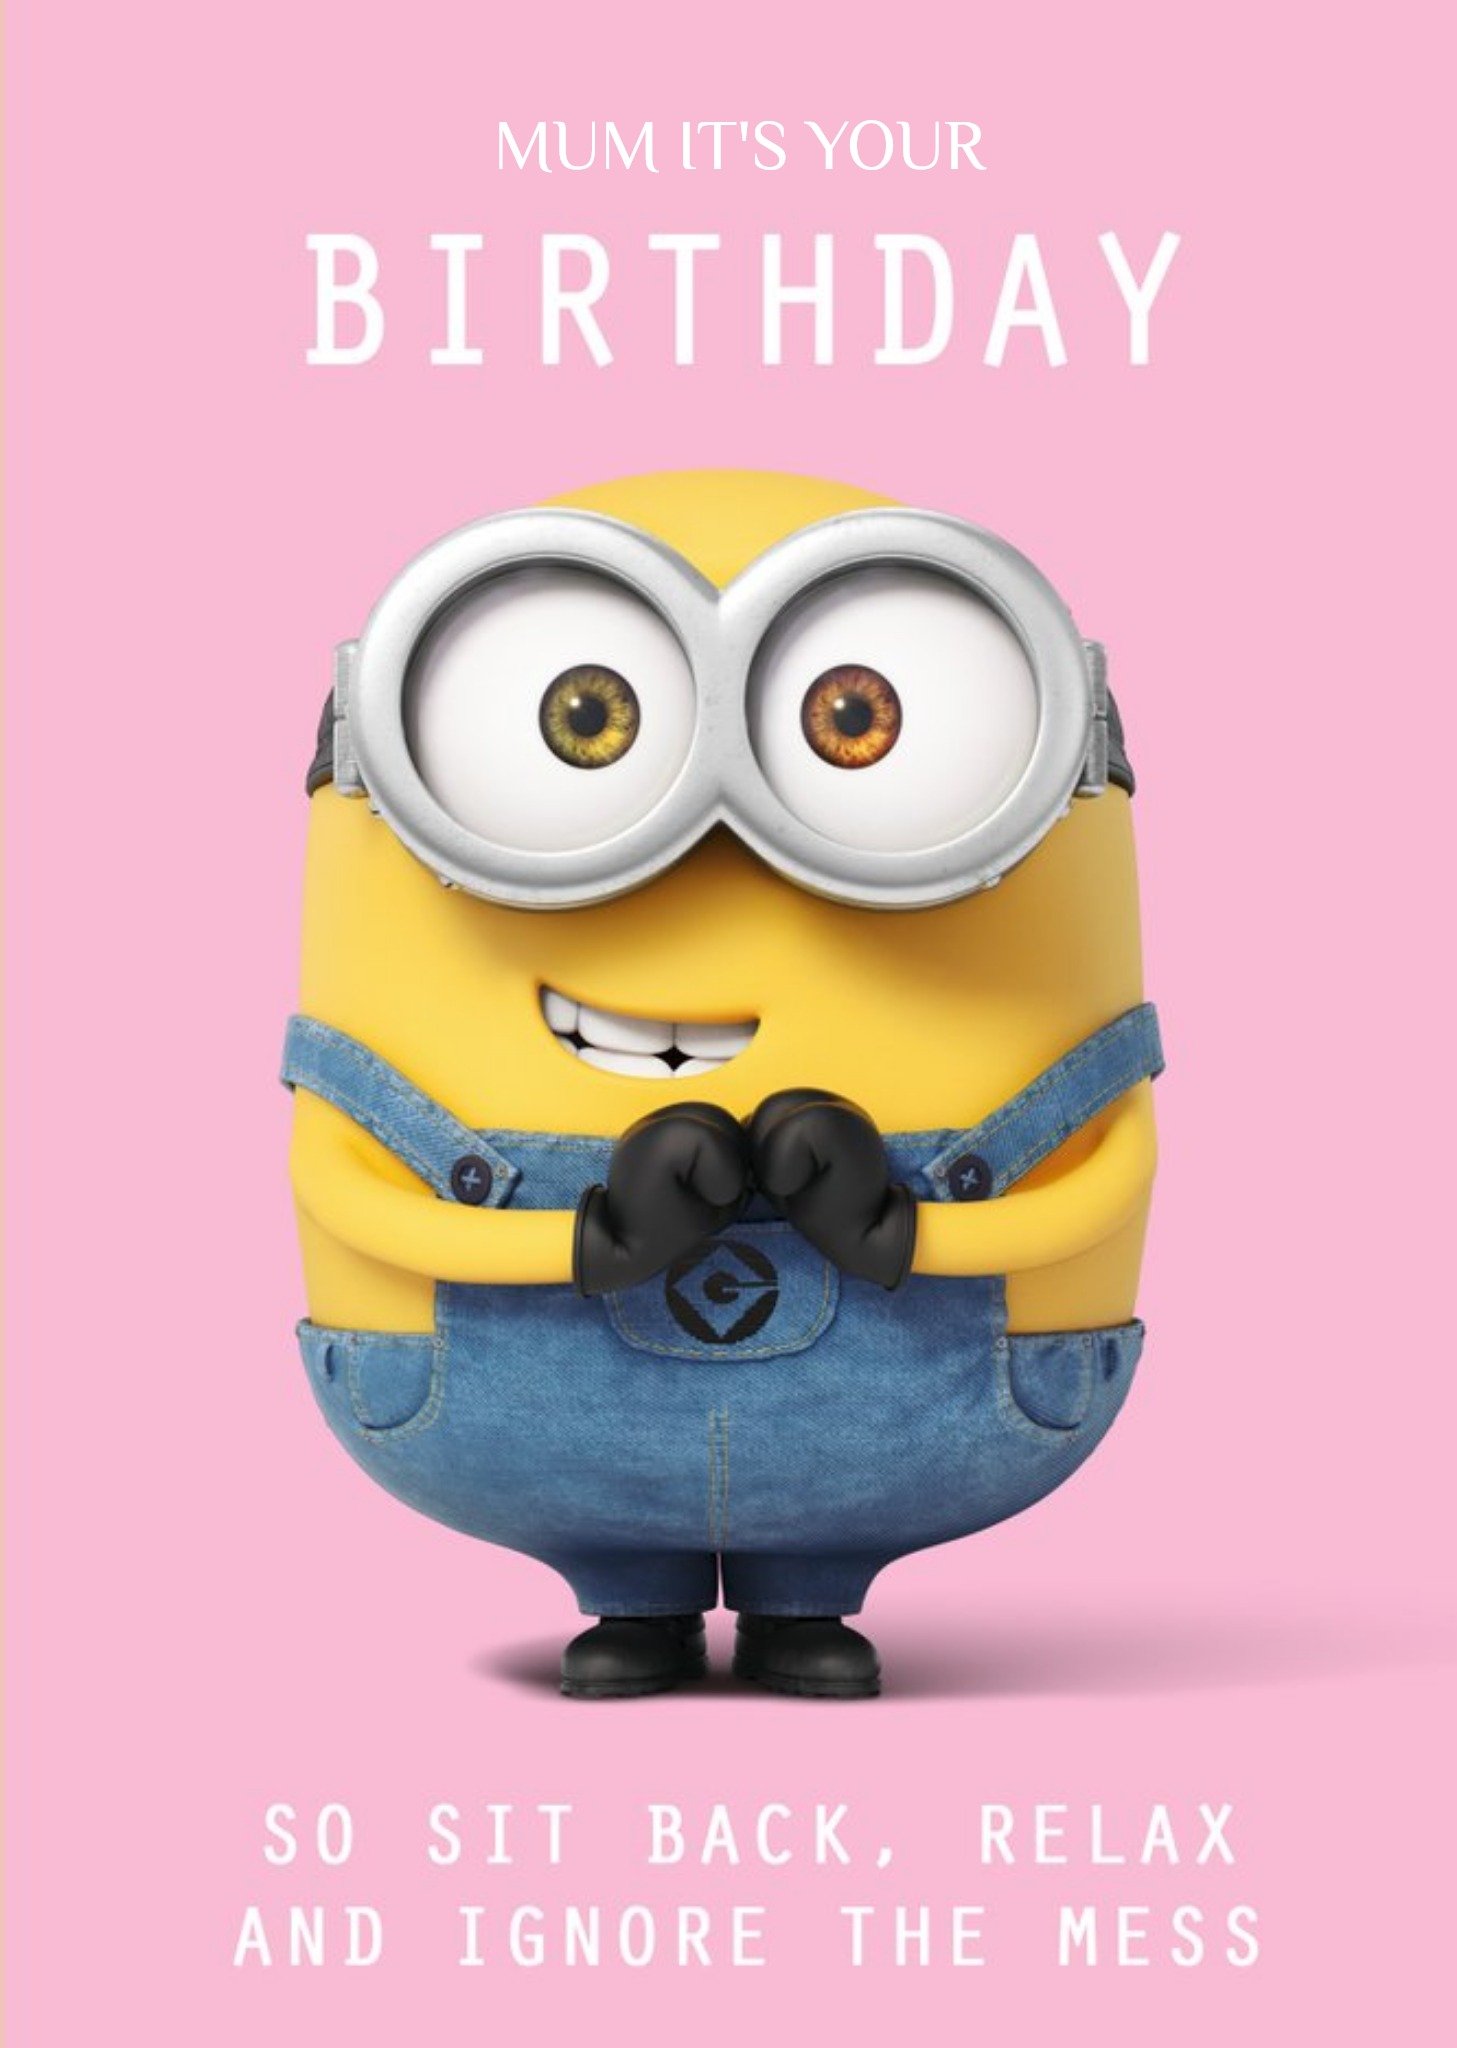 Despicable Me Minions Sit Back Relax Mum Birthday Card, Large